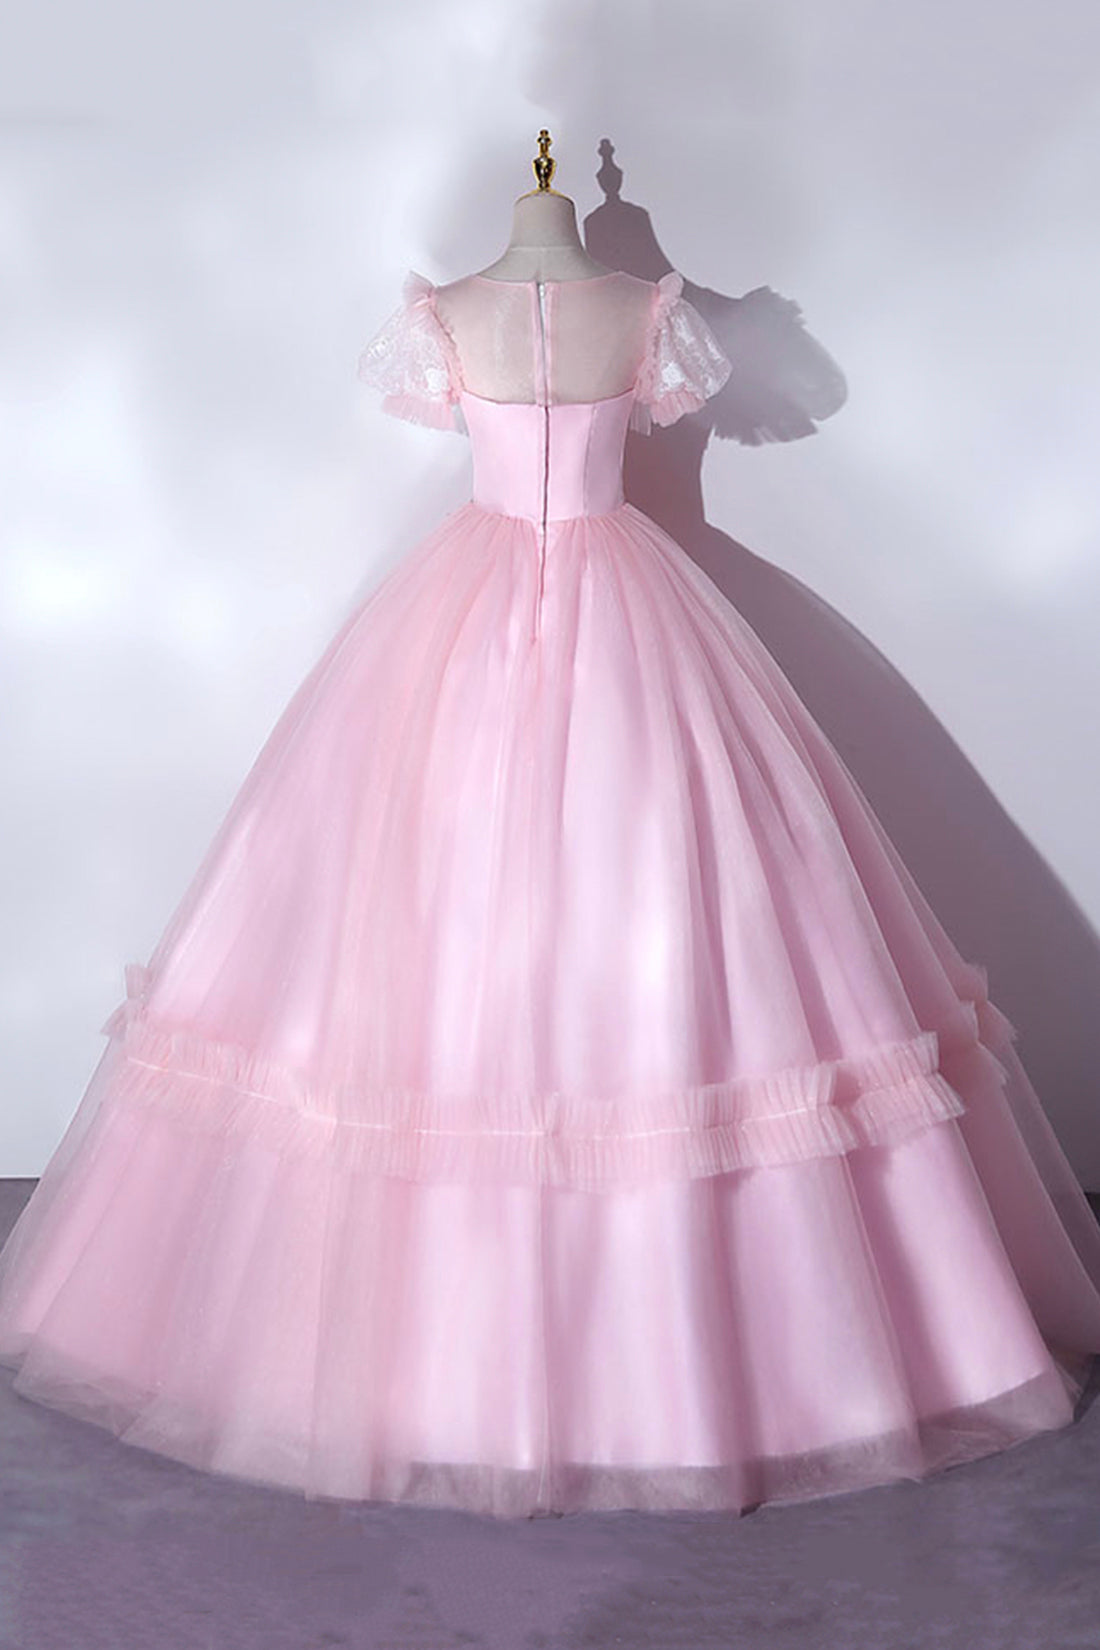 Bridesmaid Dress Modest, Pink Tulle Lace Long Prom Dress, Lovely A-Line Short Sleeve Evening Dress